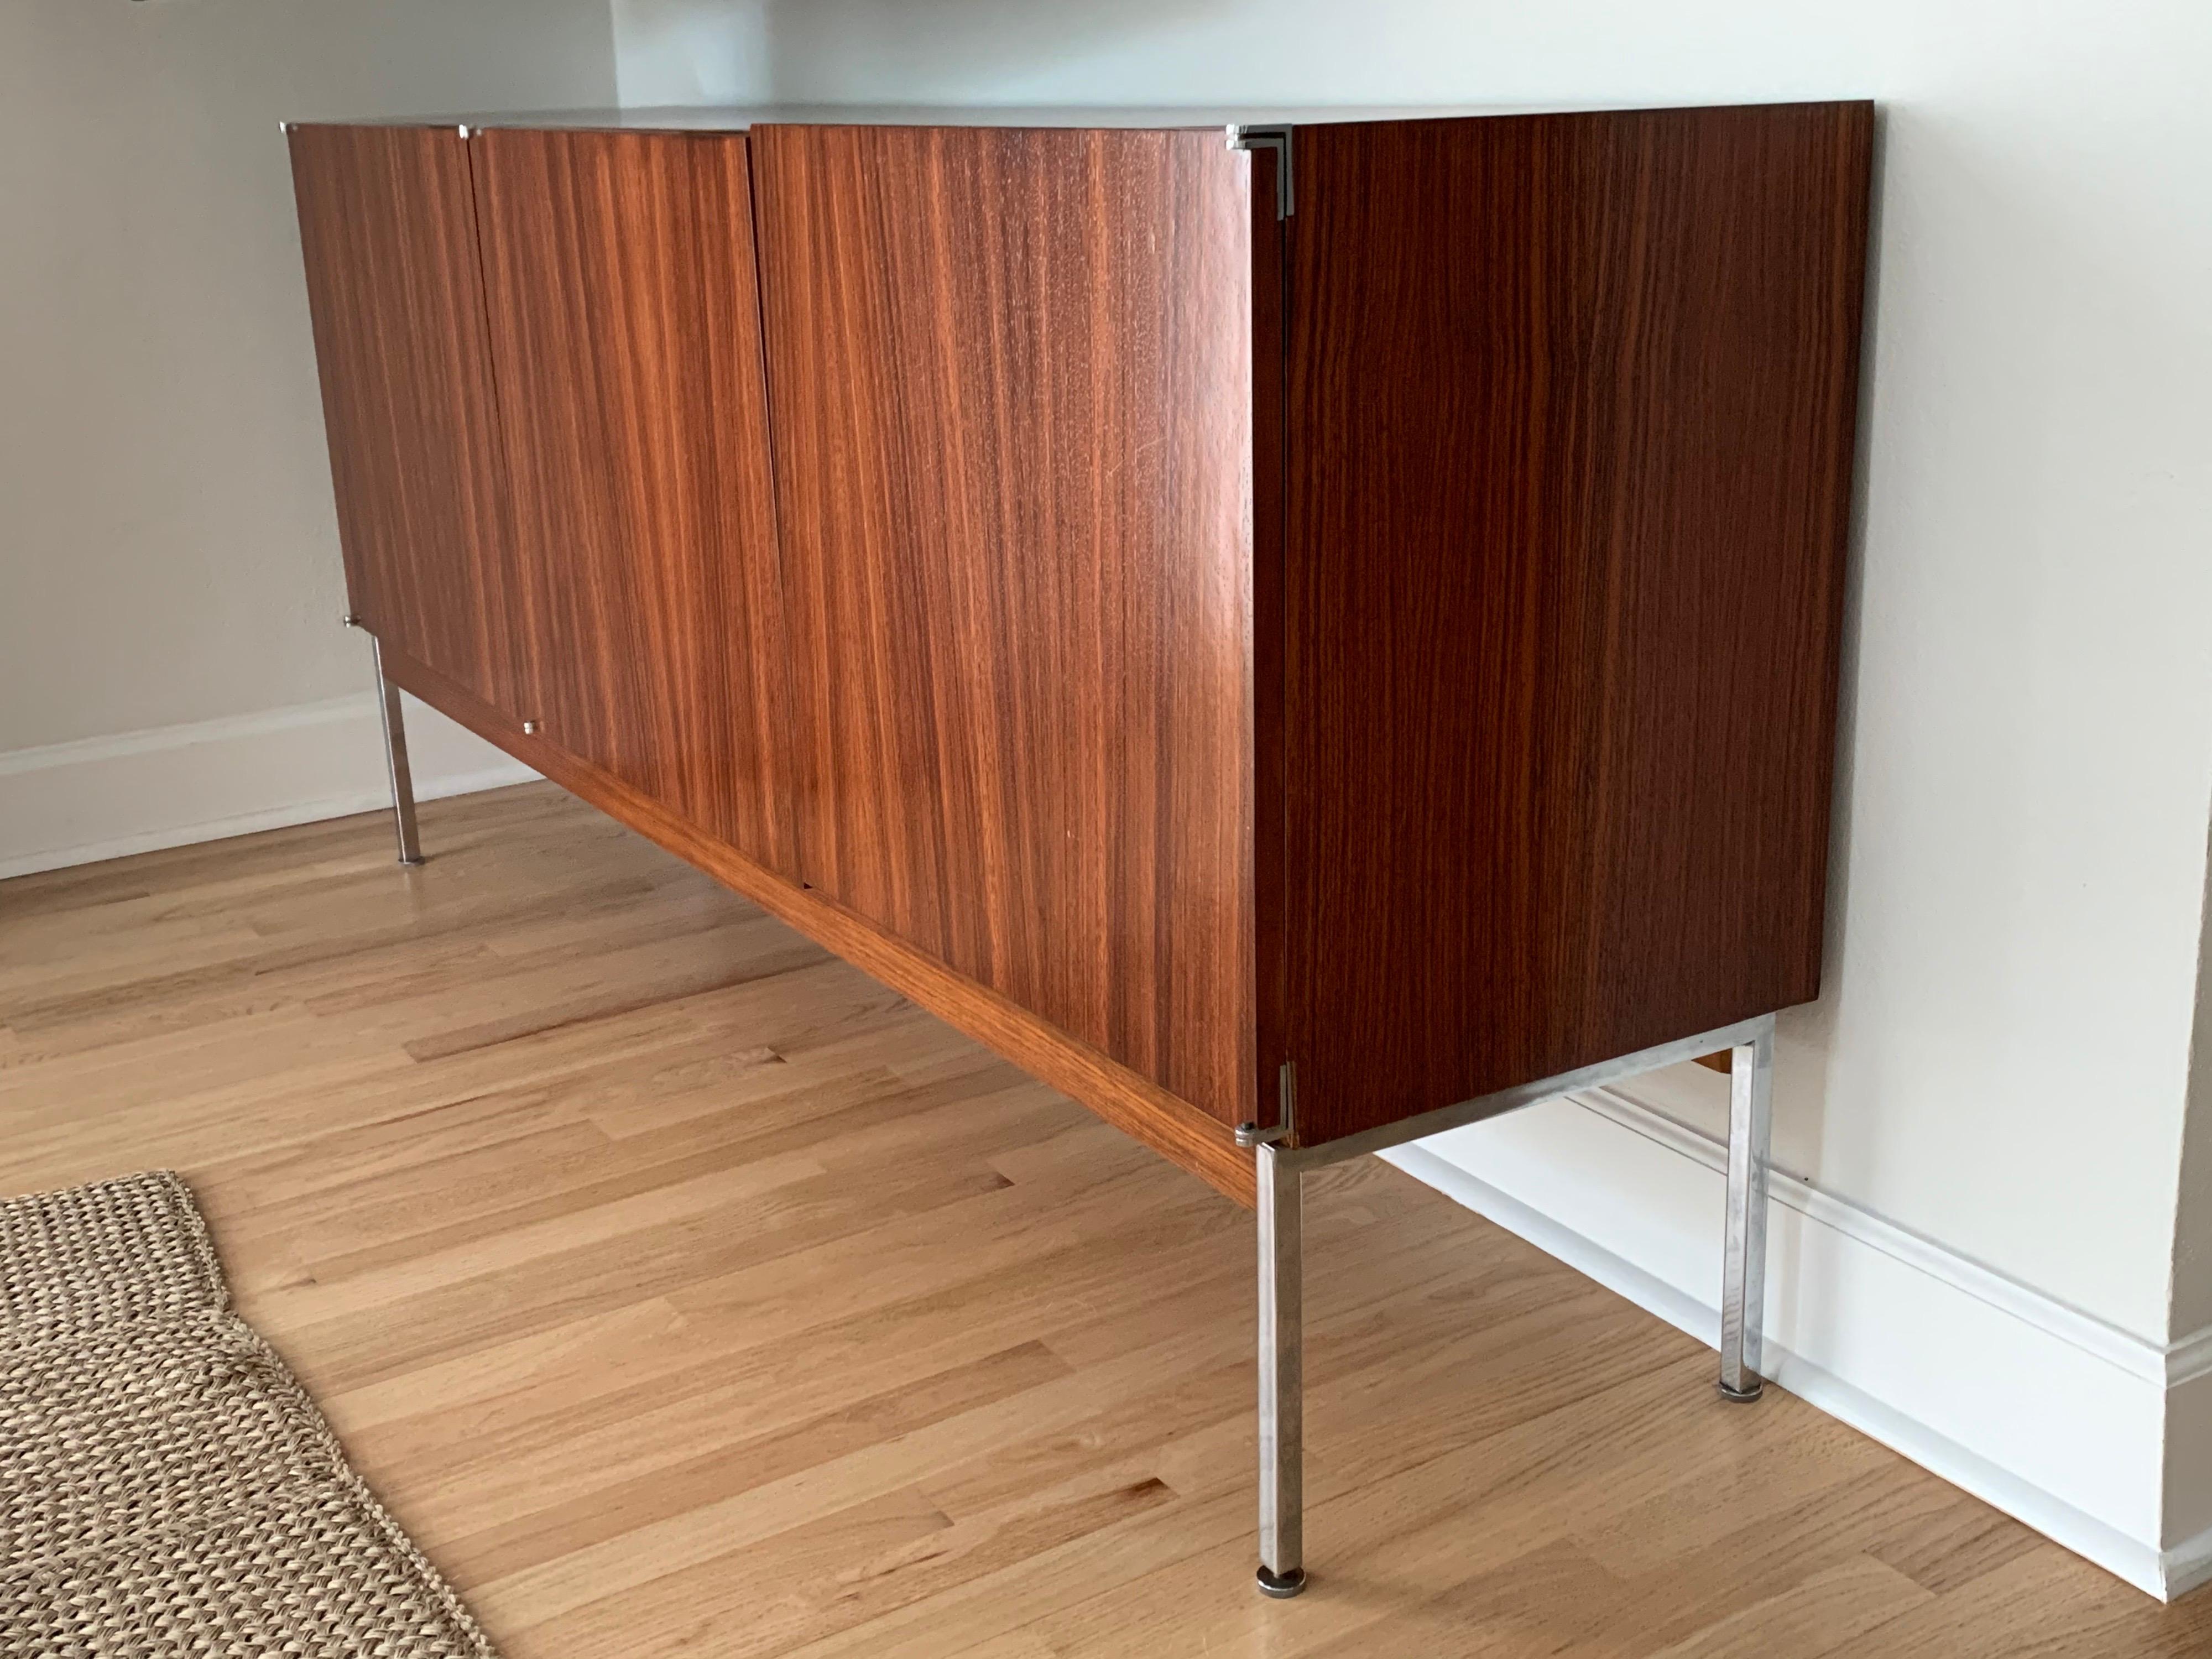 Stunning credenza, sideboard, cabinet, rendered in exquisite rosewood on the exterior case and contrasting light wood interior with 3 doors, 2 of which open to a compartment with a shelf, the left door opens to find 4 gray felt lined drawers. This